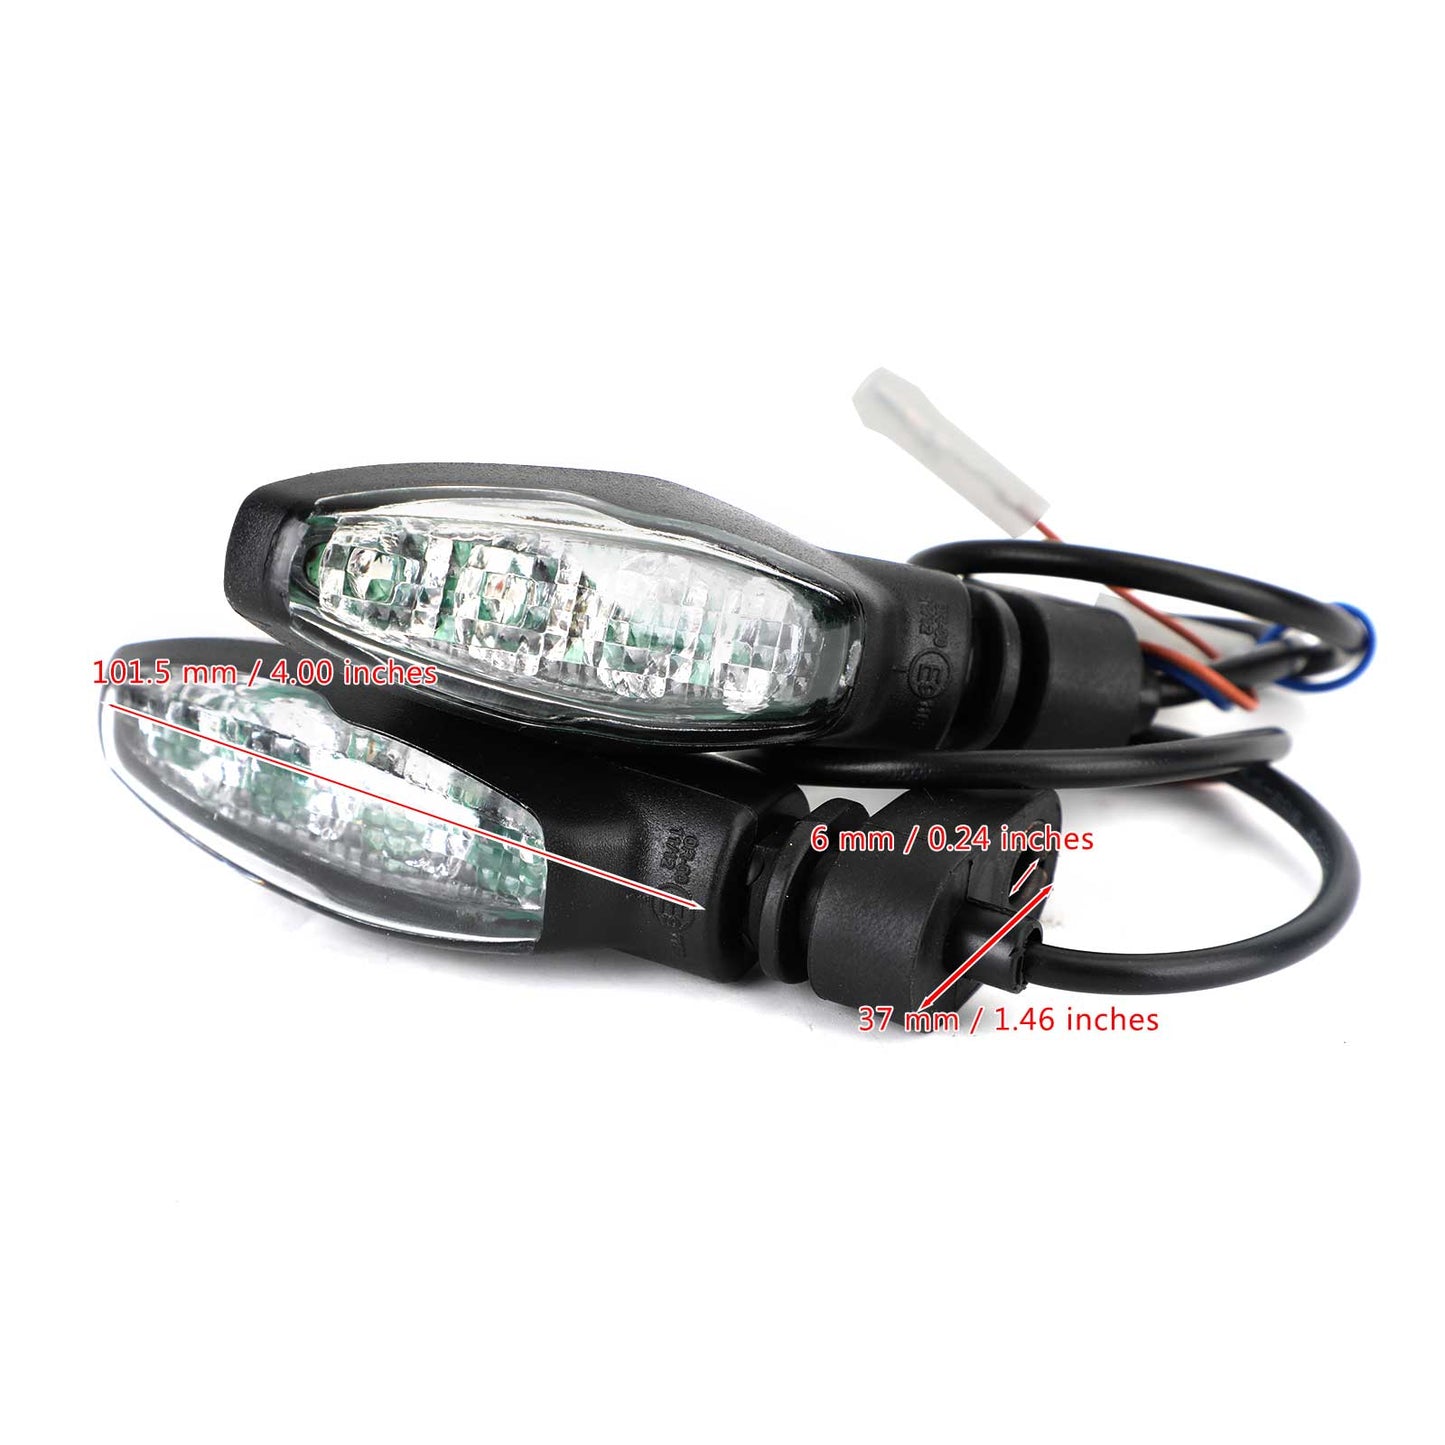 TRIUMPH Tiger 800 1200 Speed Triple R/RS/S Motorcycle Turn Indicator Signal